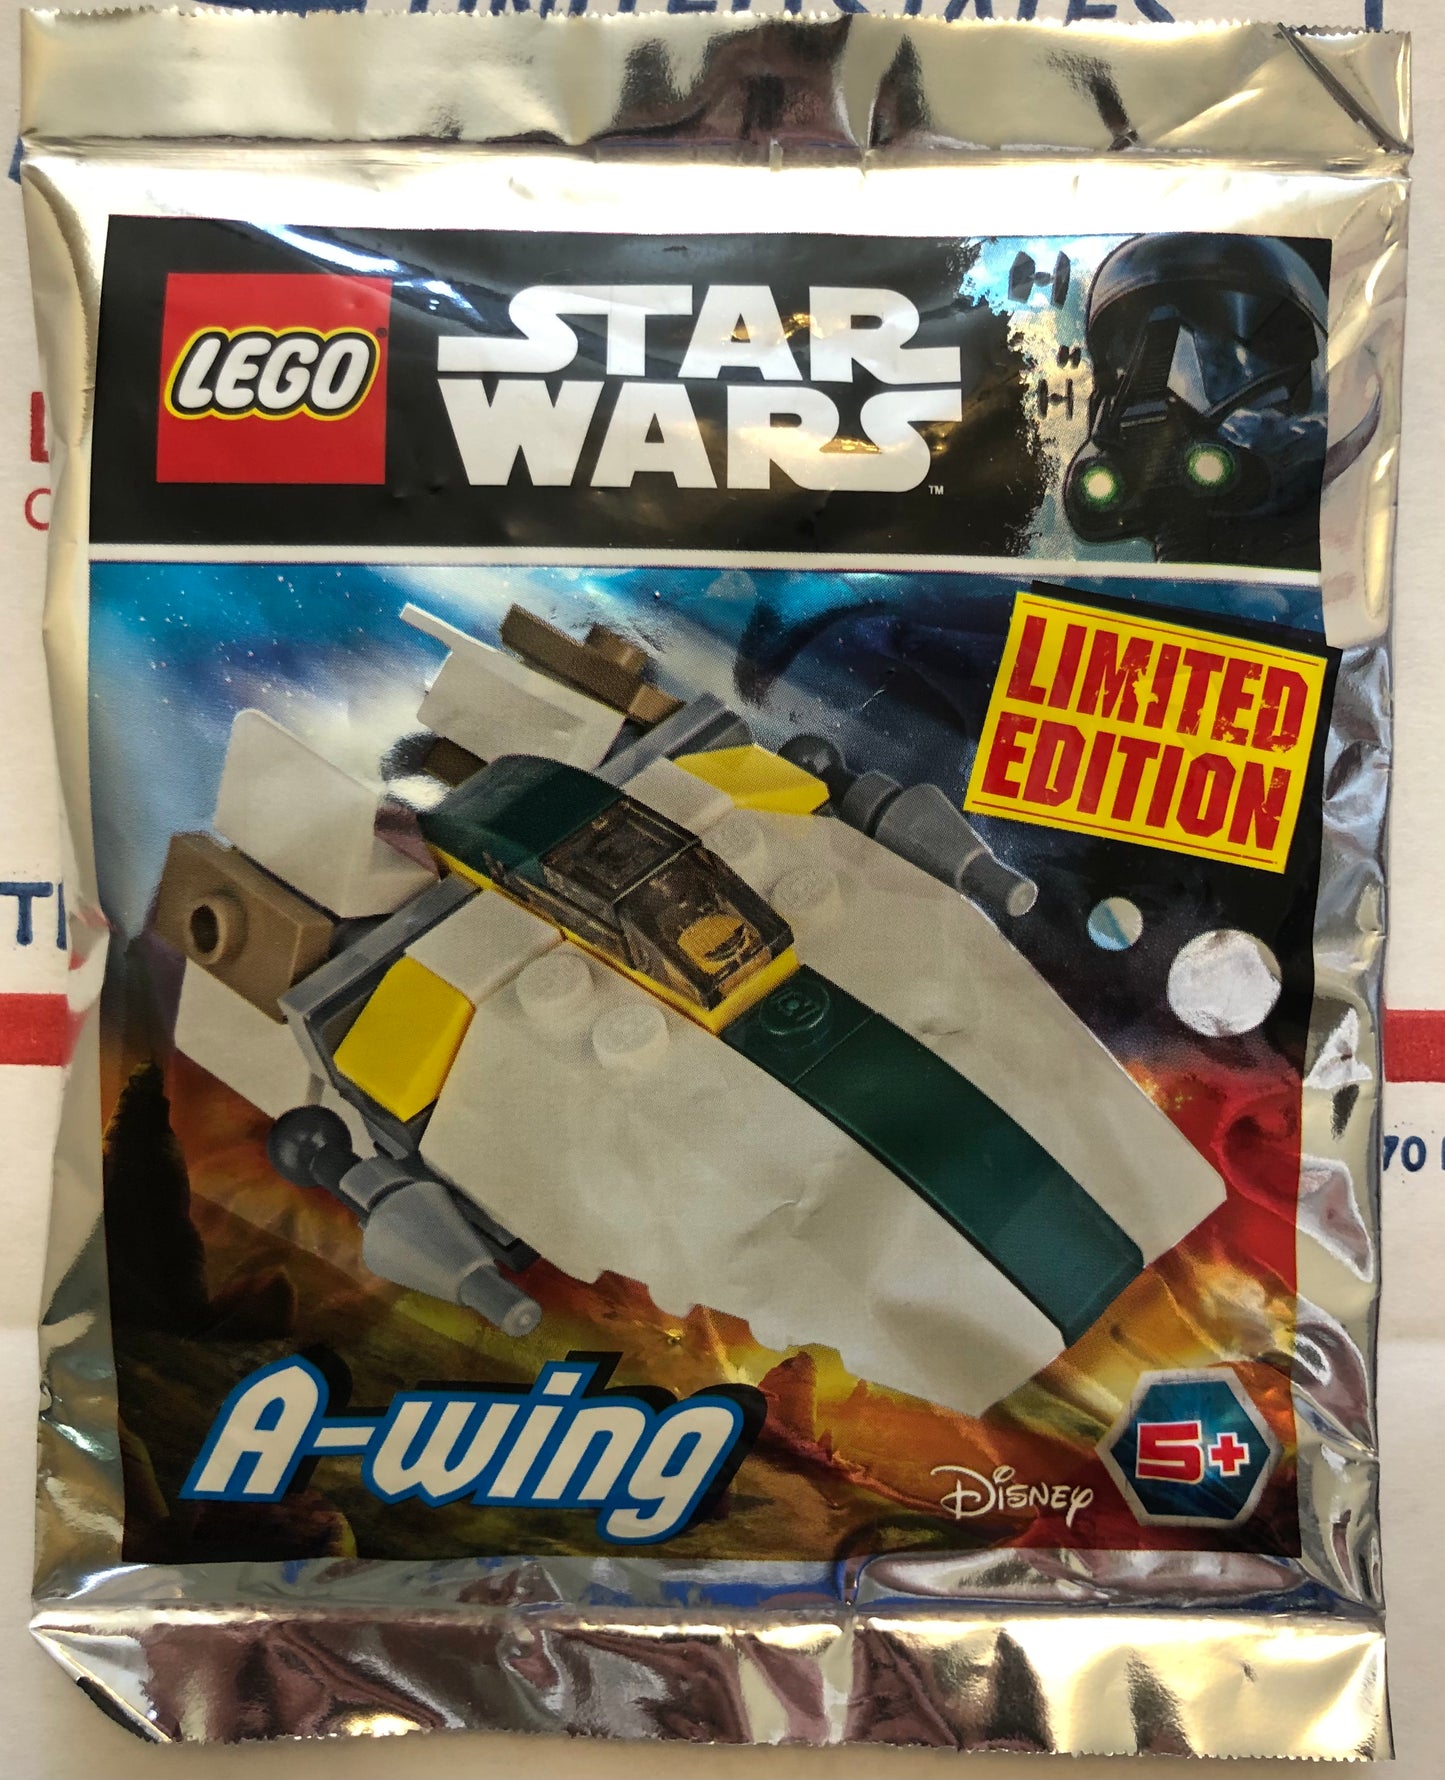 LEGO Star Wars Limited Edition A-Wing (White Green) Foil Pack Bag Build Set 911724